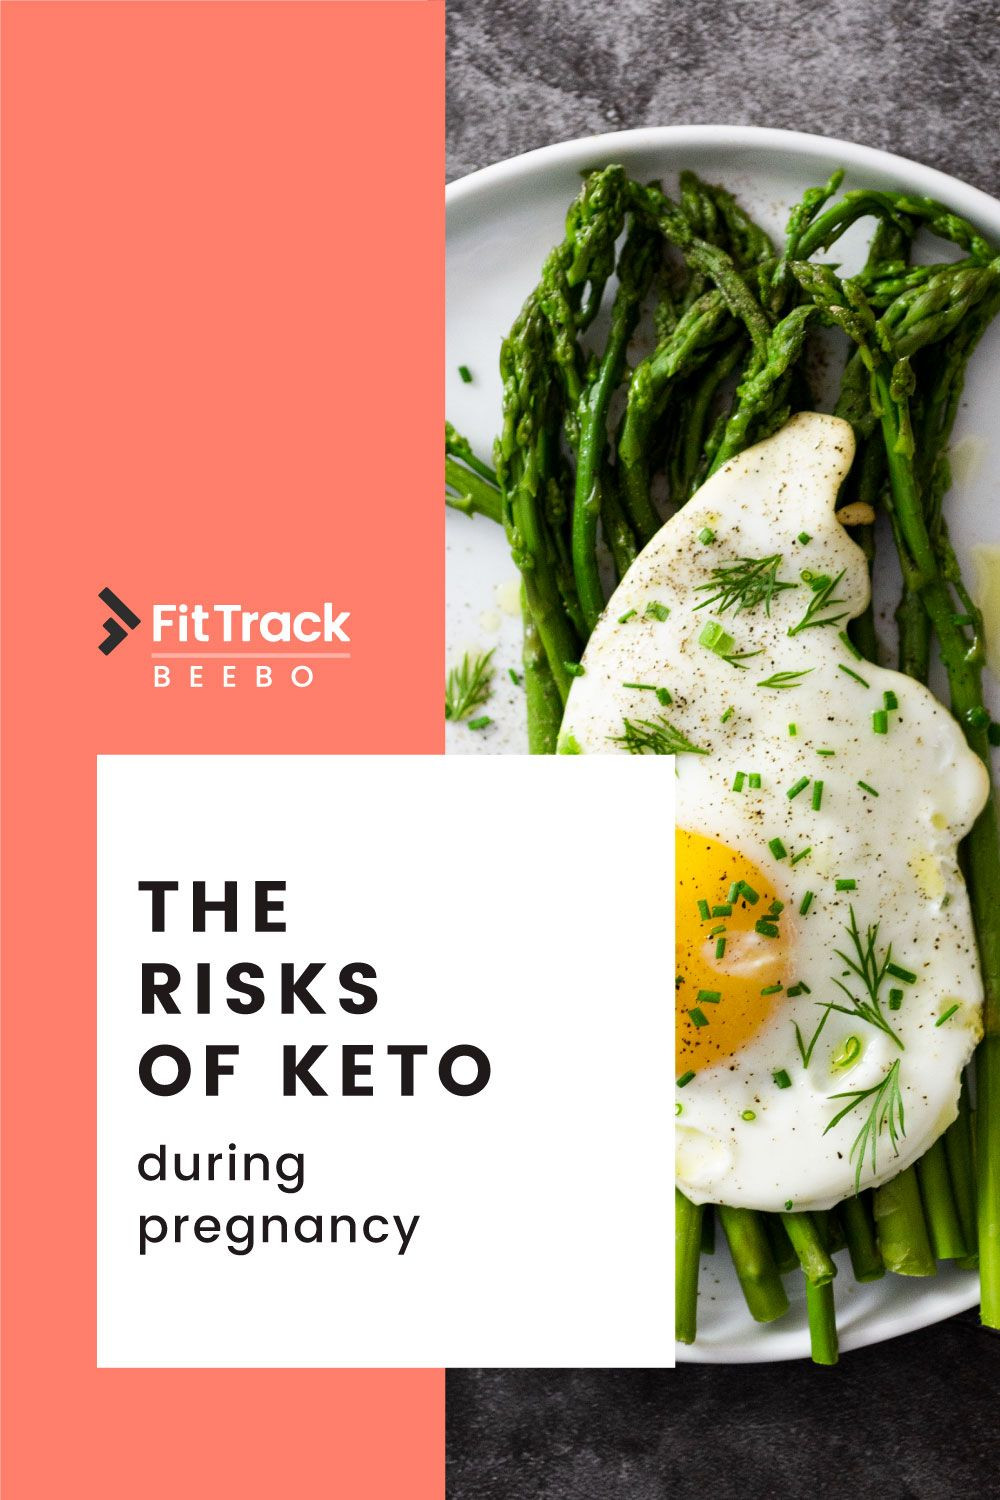 Keto Diet And Pregnancy
 Keto While Pregnant Is It Safe Are There Risks in